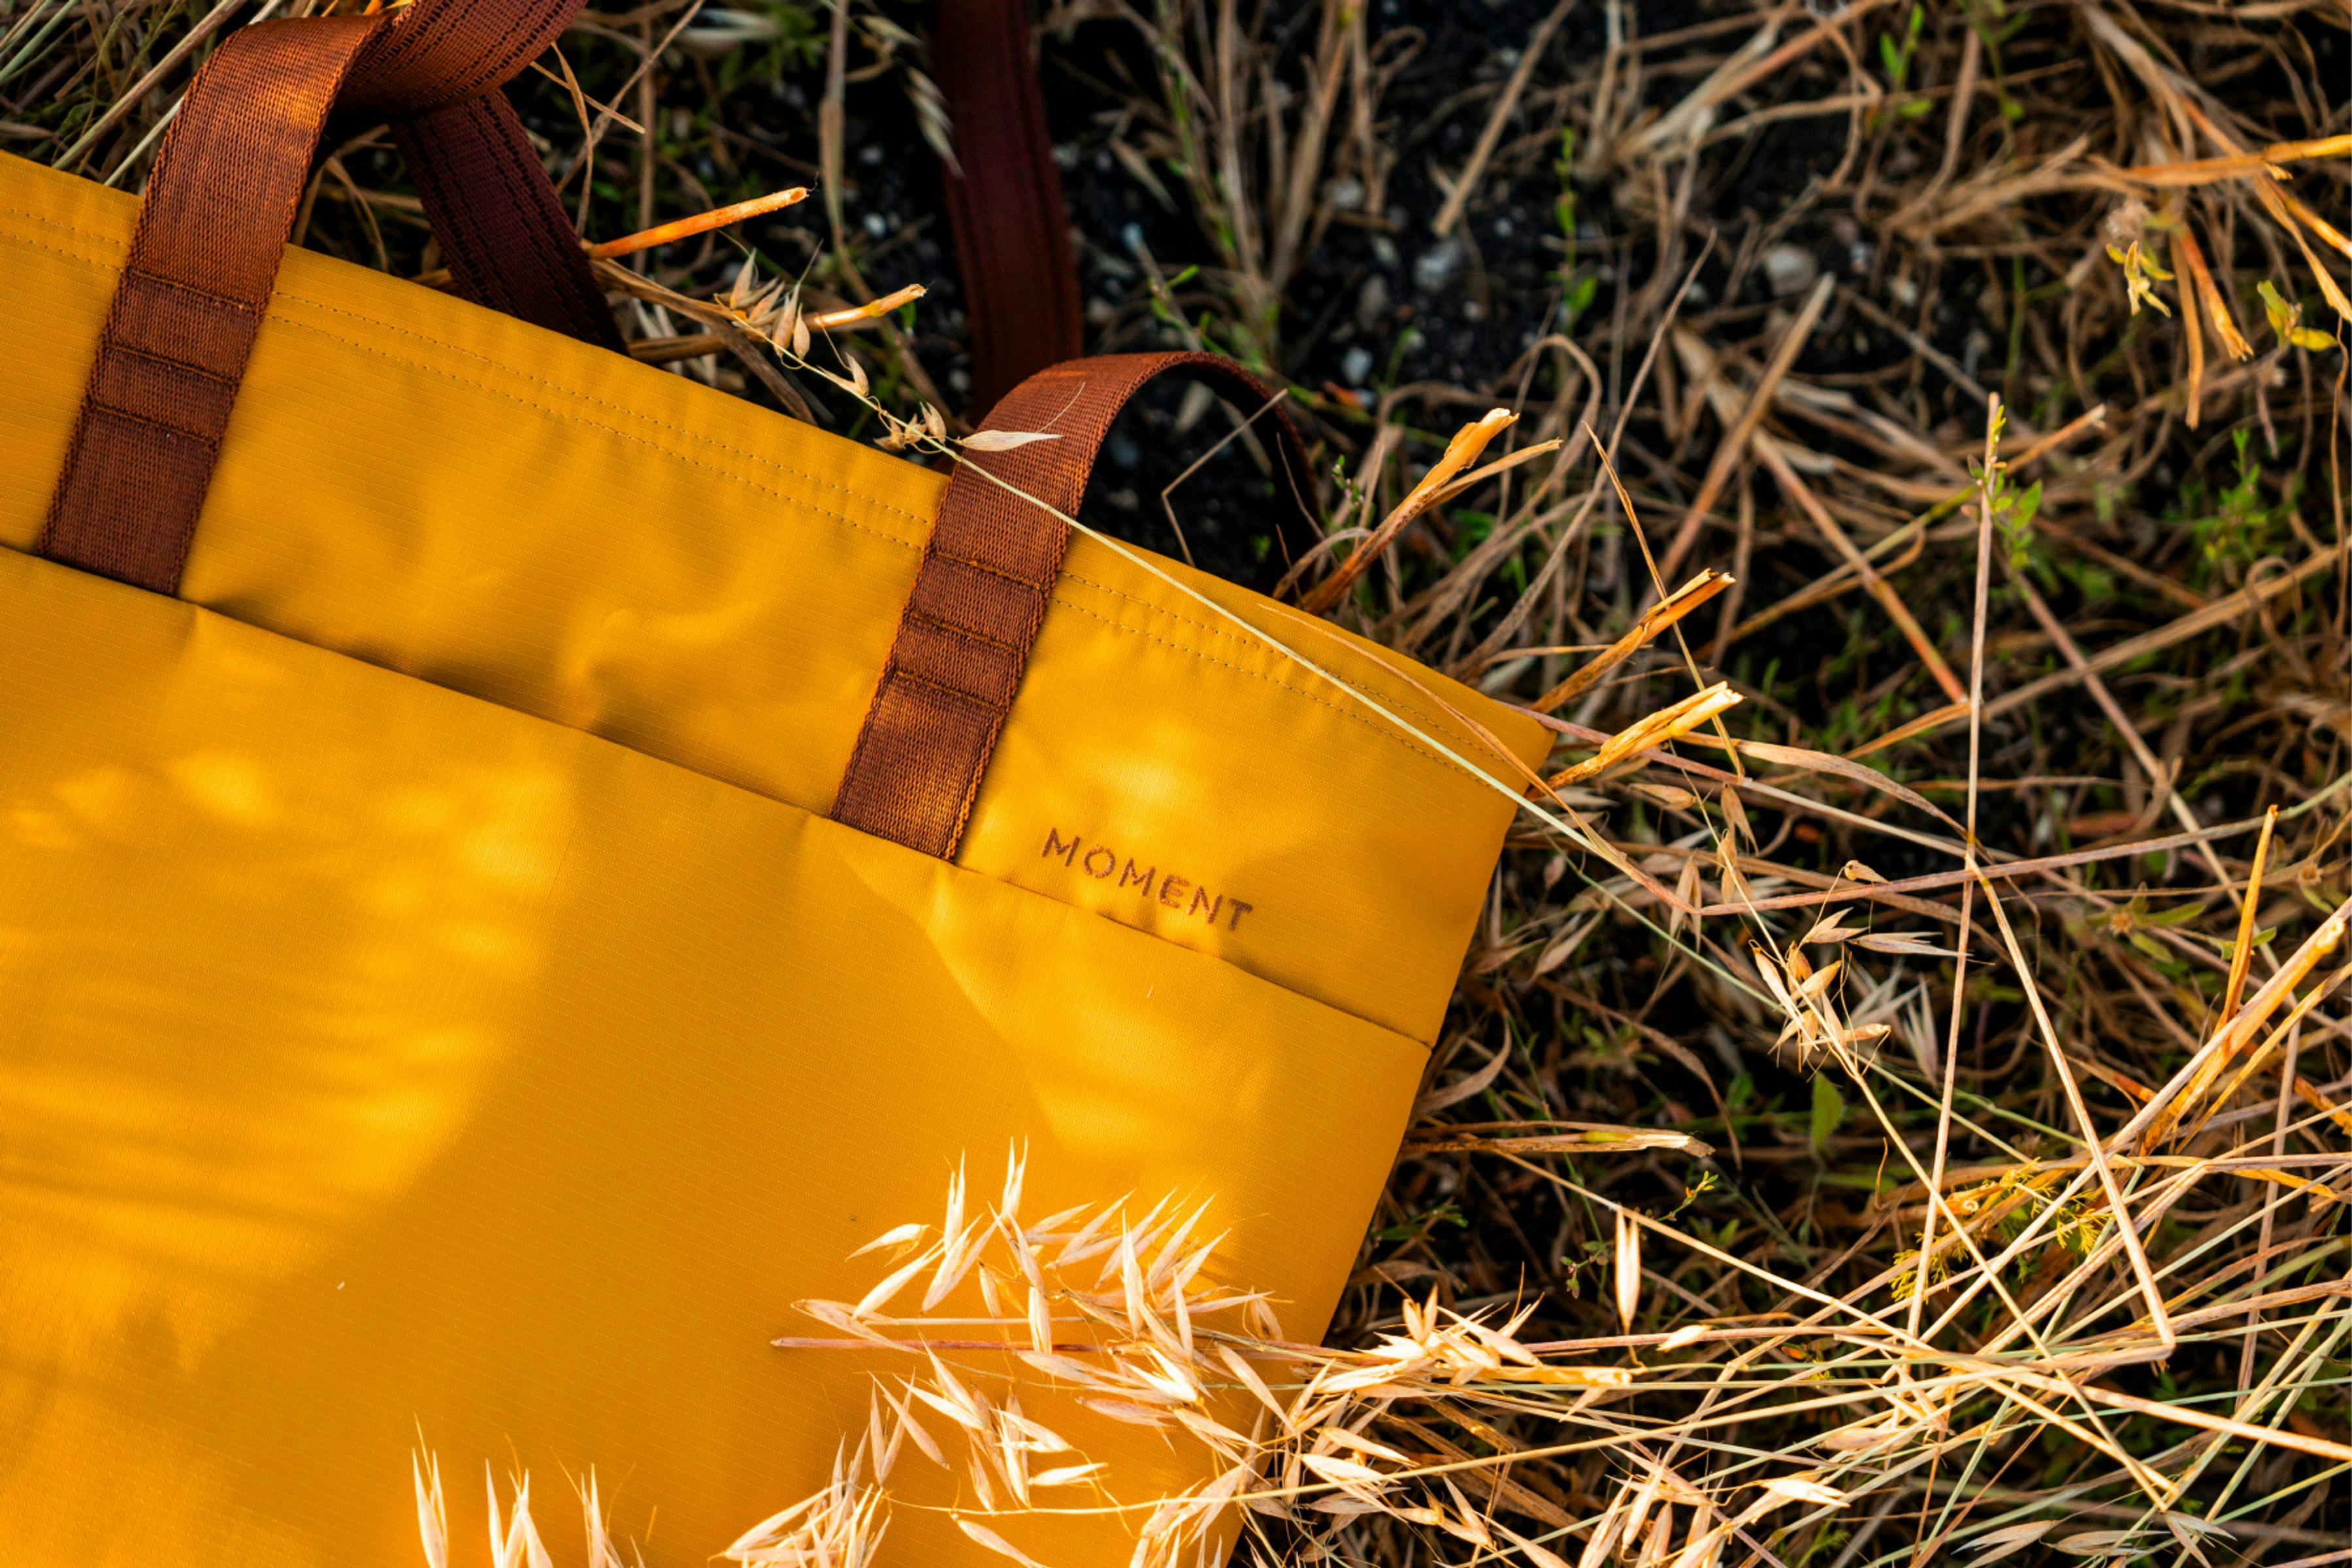 Everything Tote in the wild under a light rainfall showing durability.